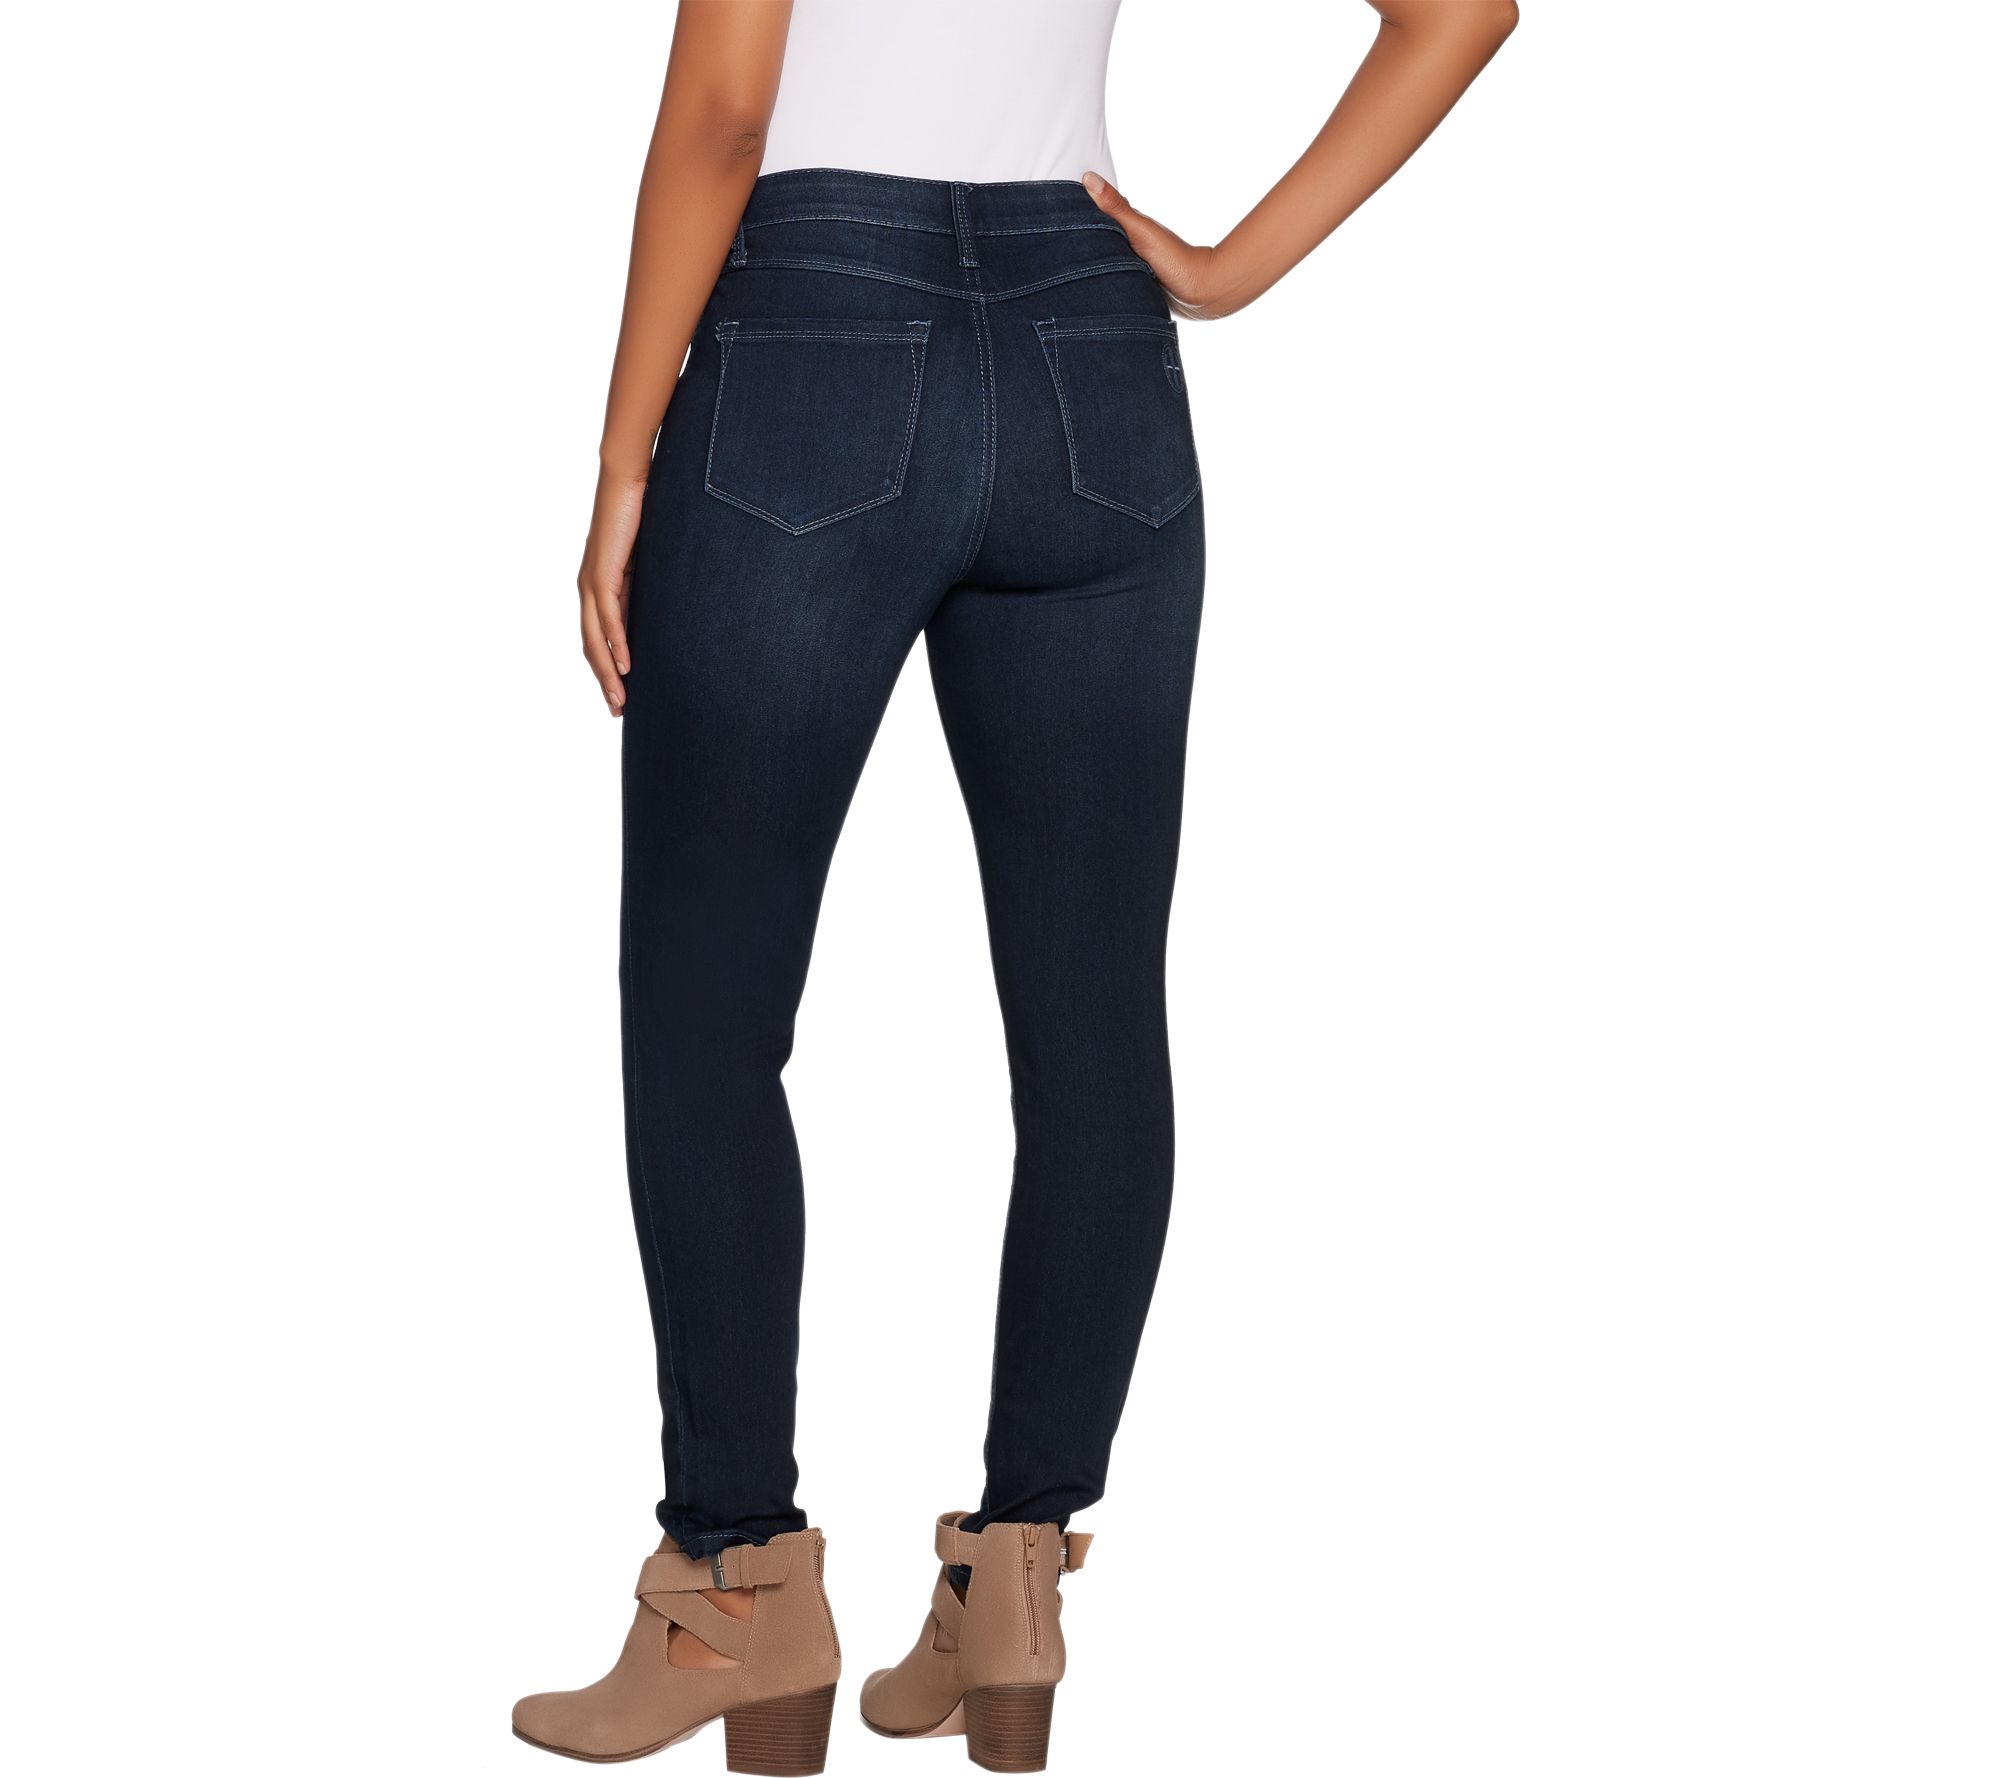 Laurie Felt Silky Denim Skinny Ankle Pull-On Jeans - QVC.com